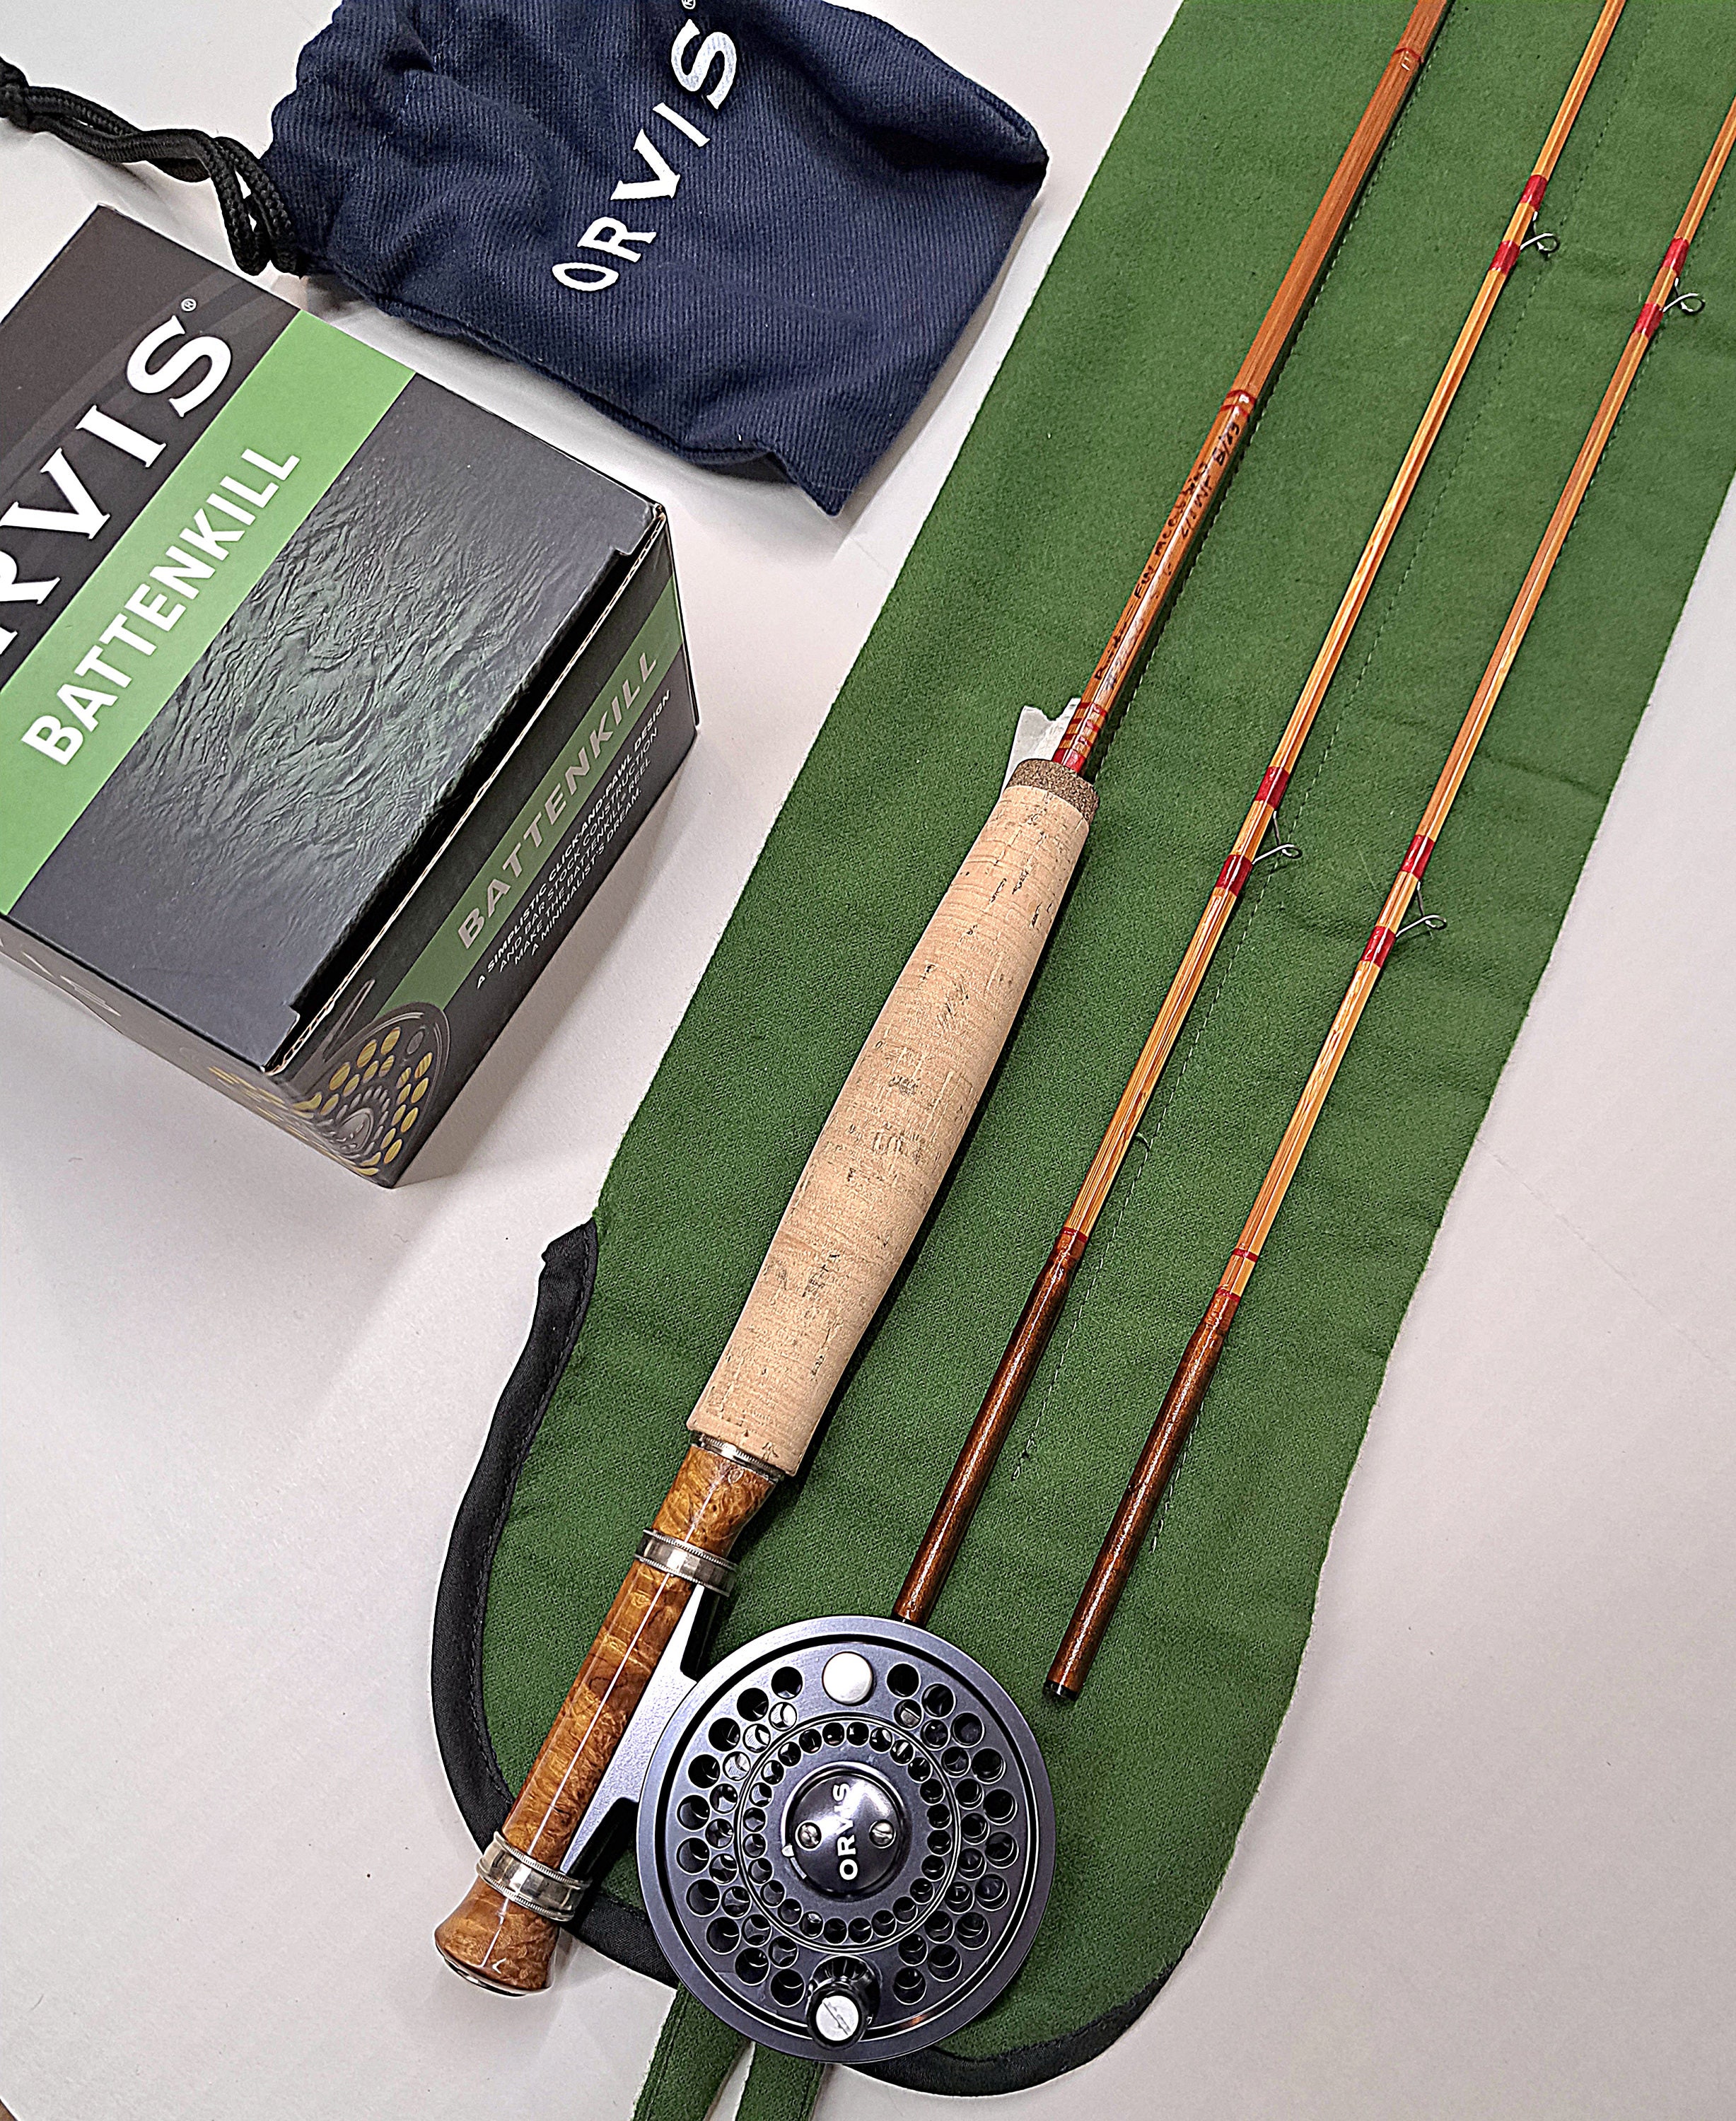 5'6, 2/2, 2/3 Weight Custom Built Small Stream Bamboo Fly Rod W/ New Orvis  Battenkill L Fly Reel and Box -  Canada